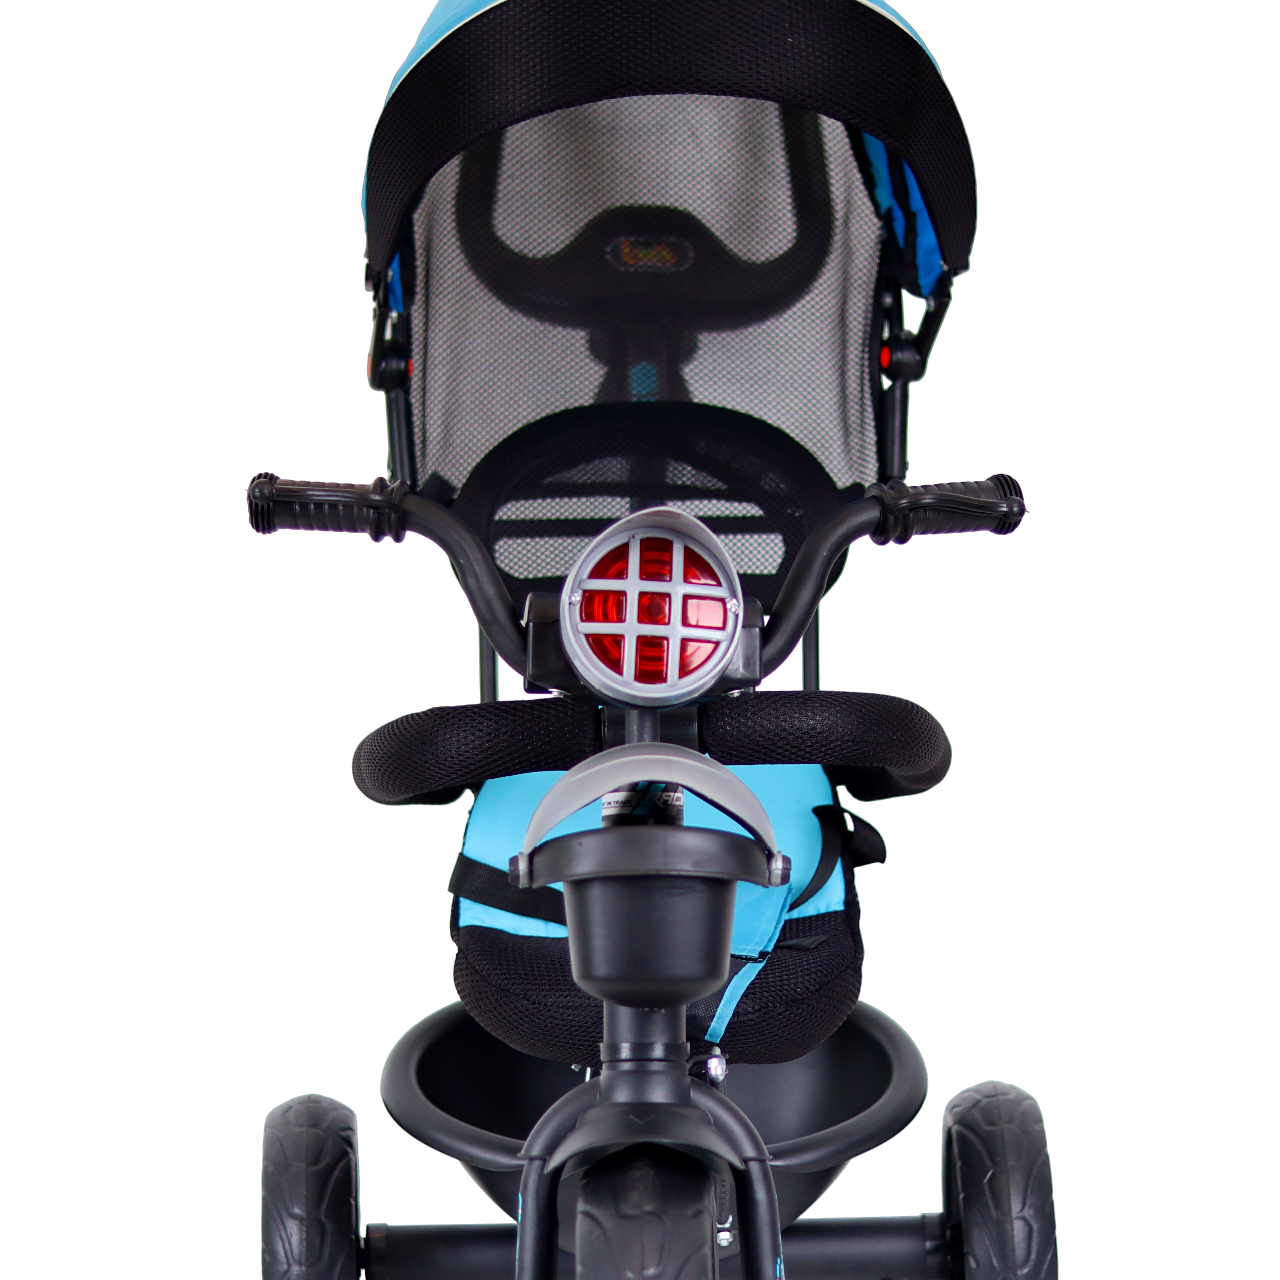 Luusa R9 Power 500 Tricycle for Kids with Hood and Parent Handle